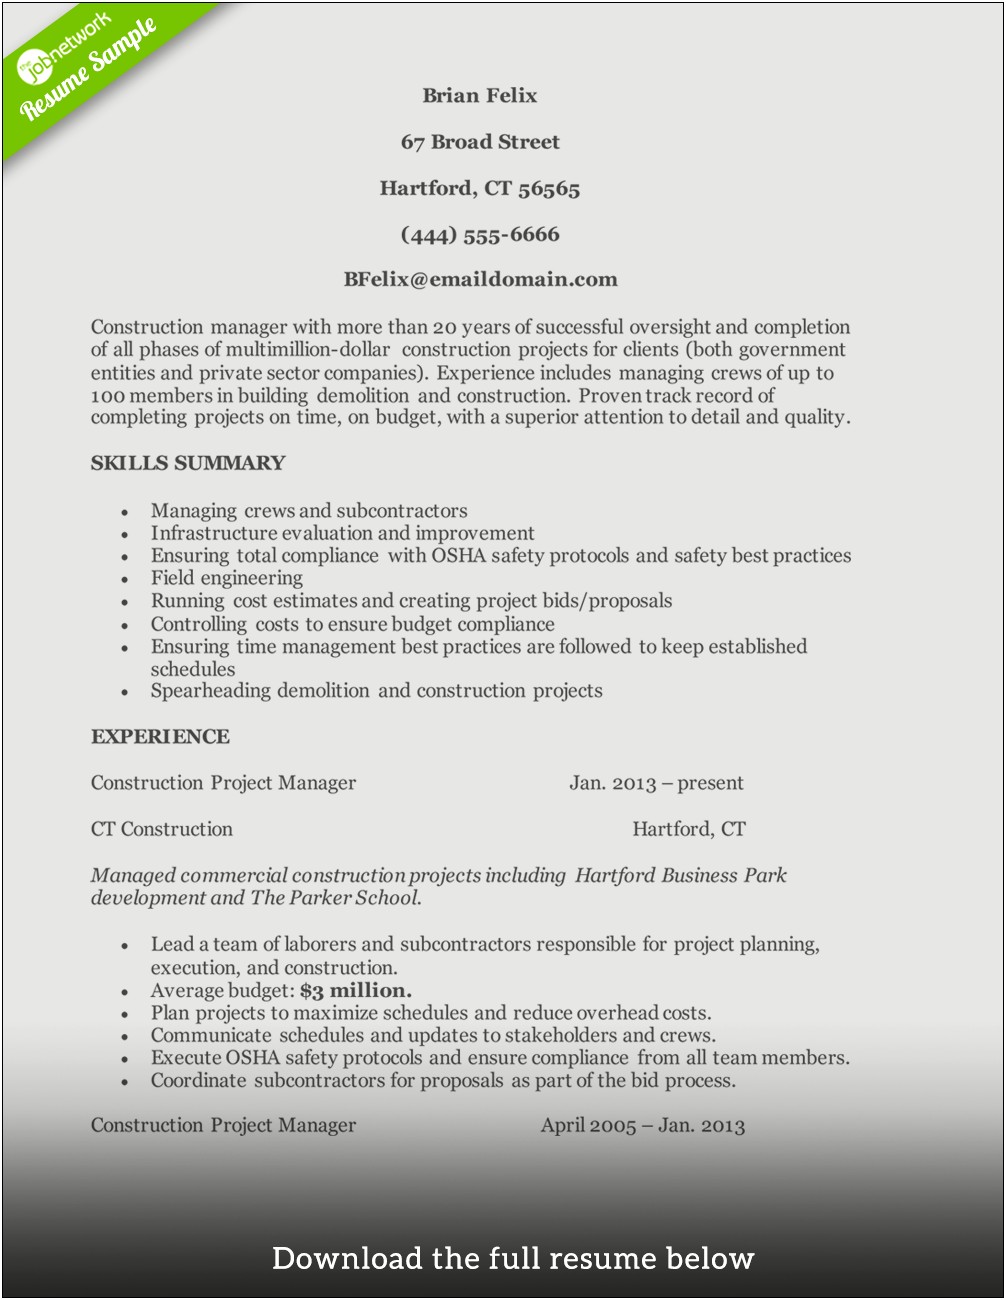 Profile For Construction Manager Resume